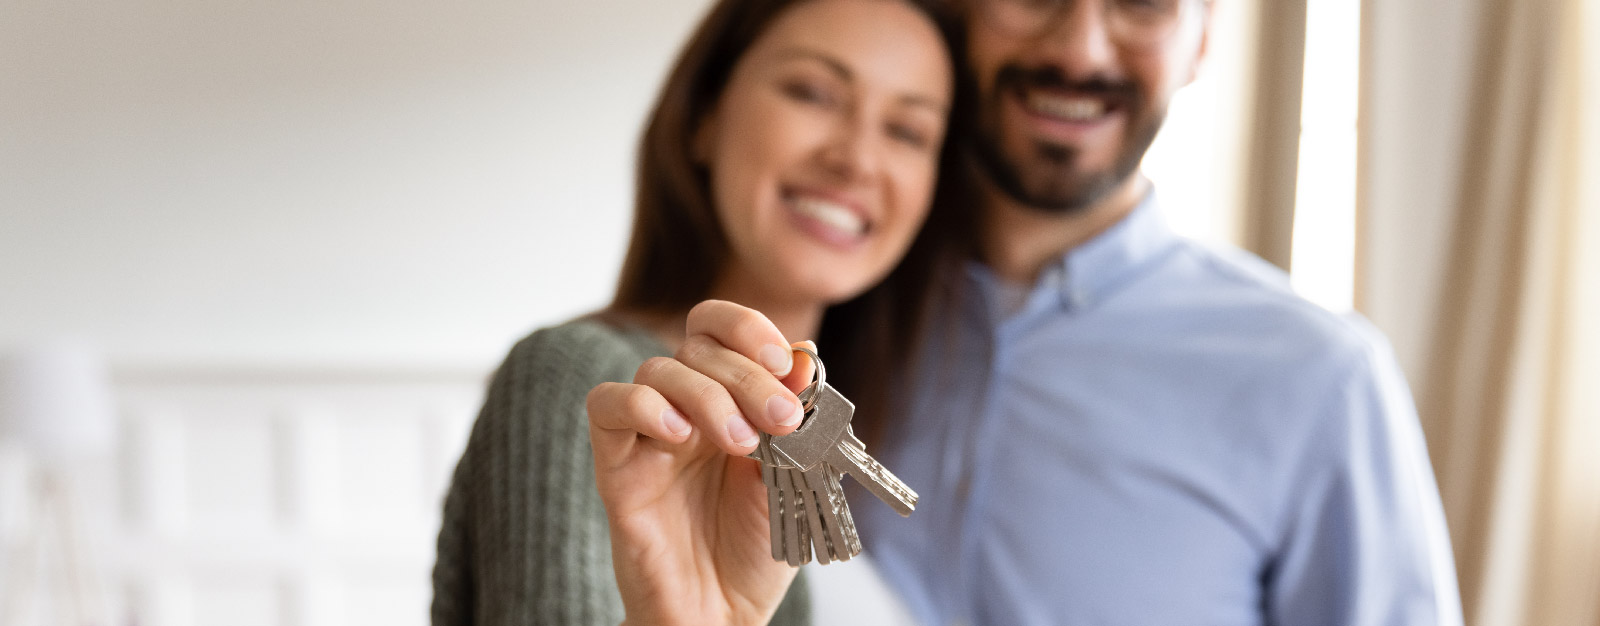 Man and woman smiling while holding keys to new home